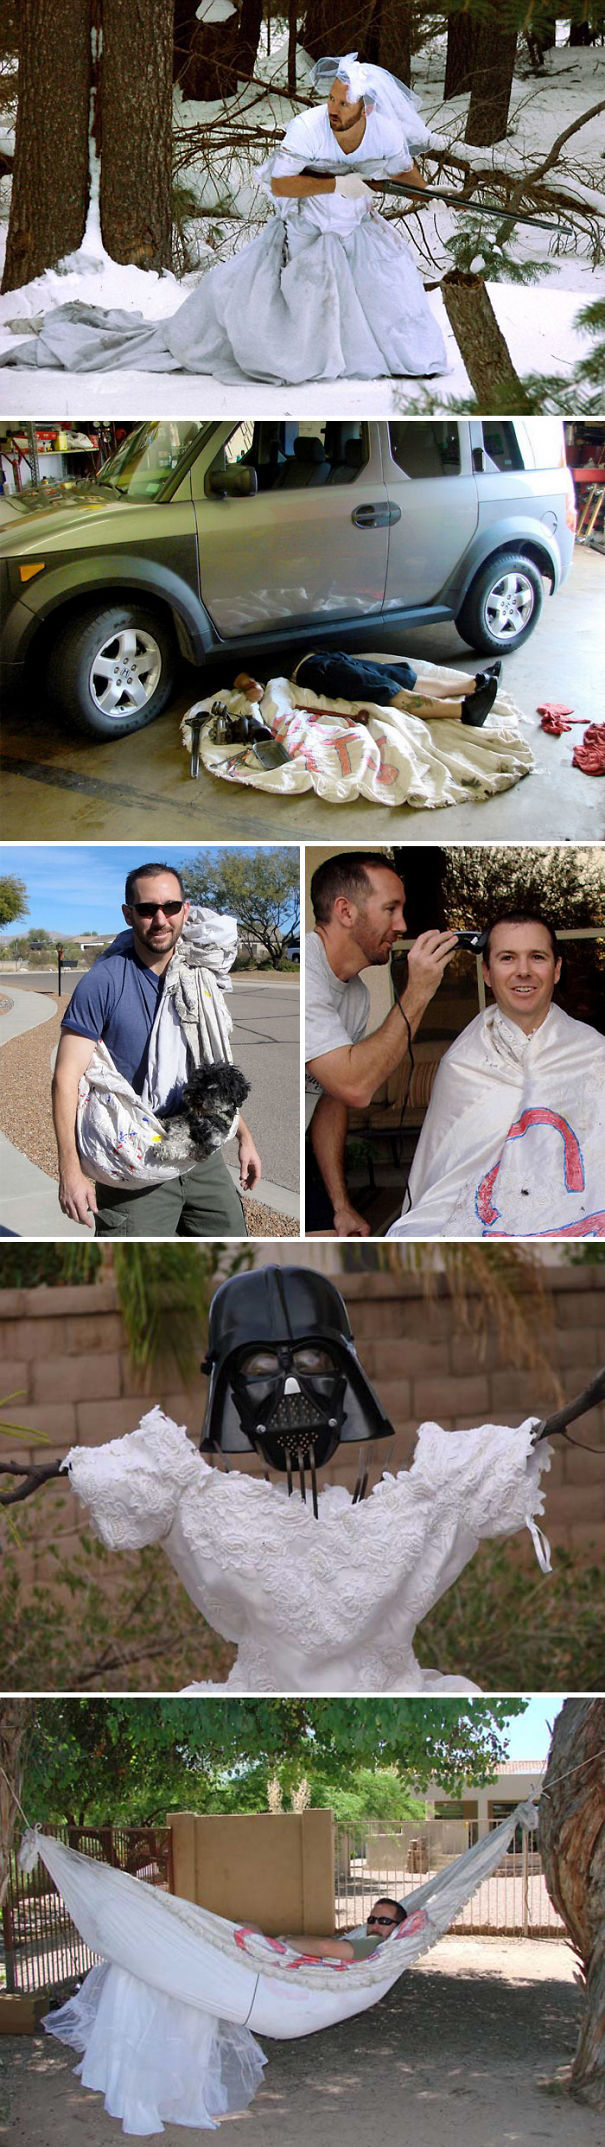 Man Finds Over 100 Ways To Use His Ex-Wife's Wedding Dress